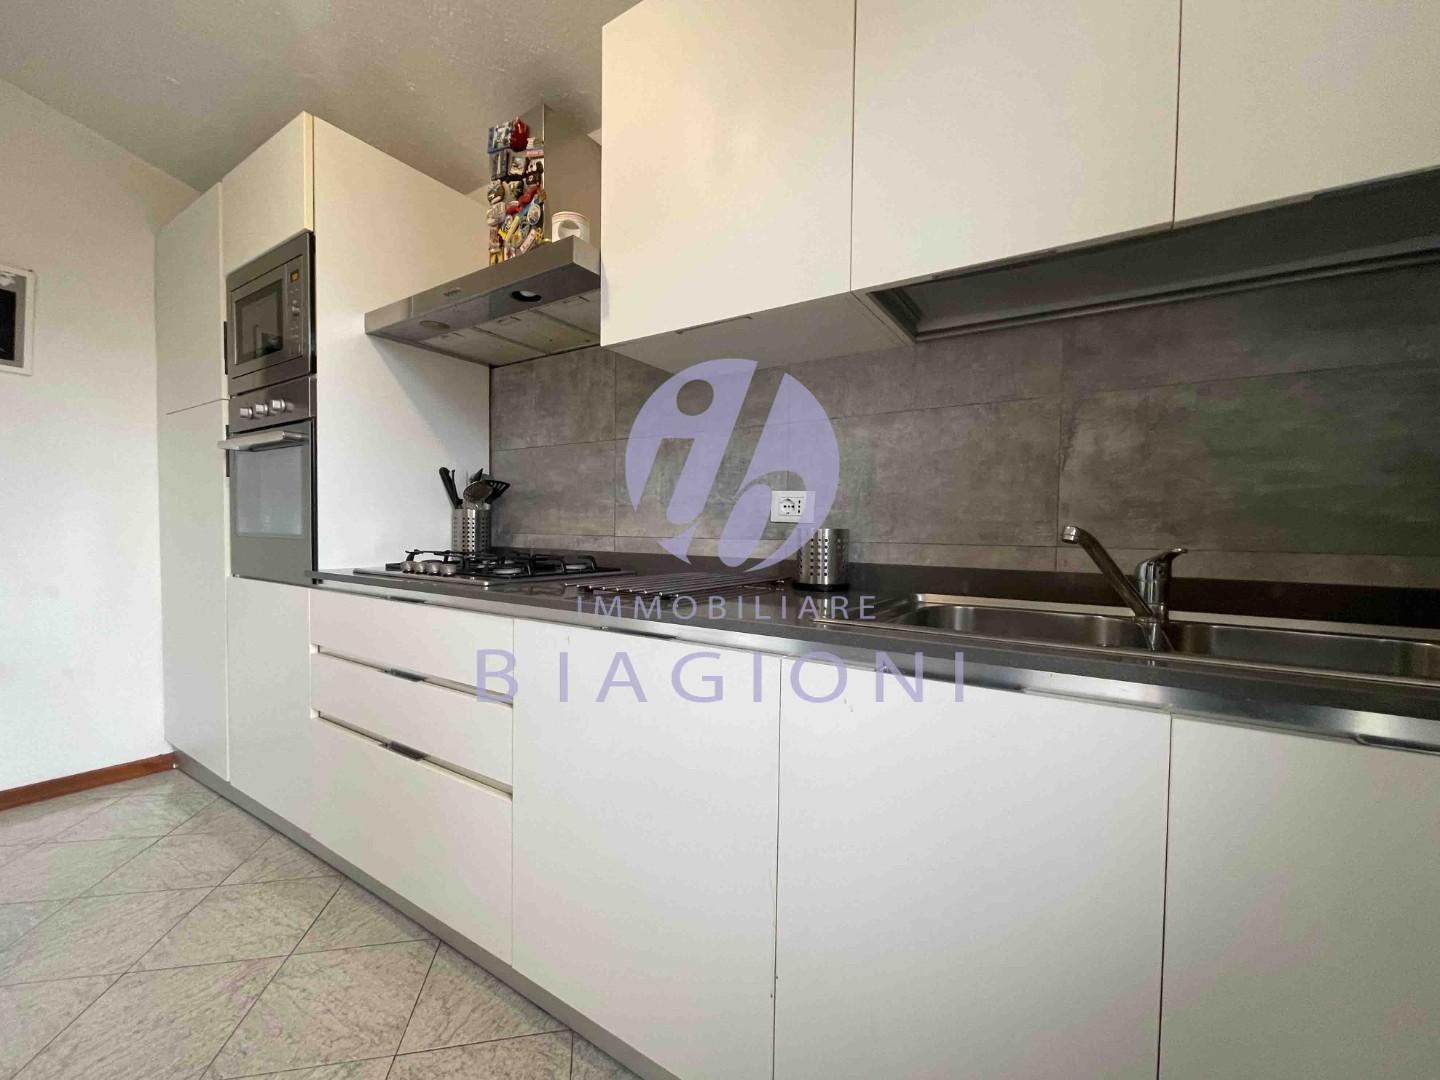 Apartment for sale, ref. 28096